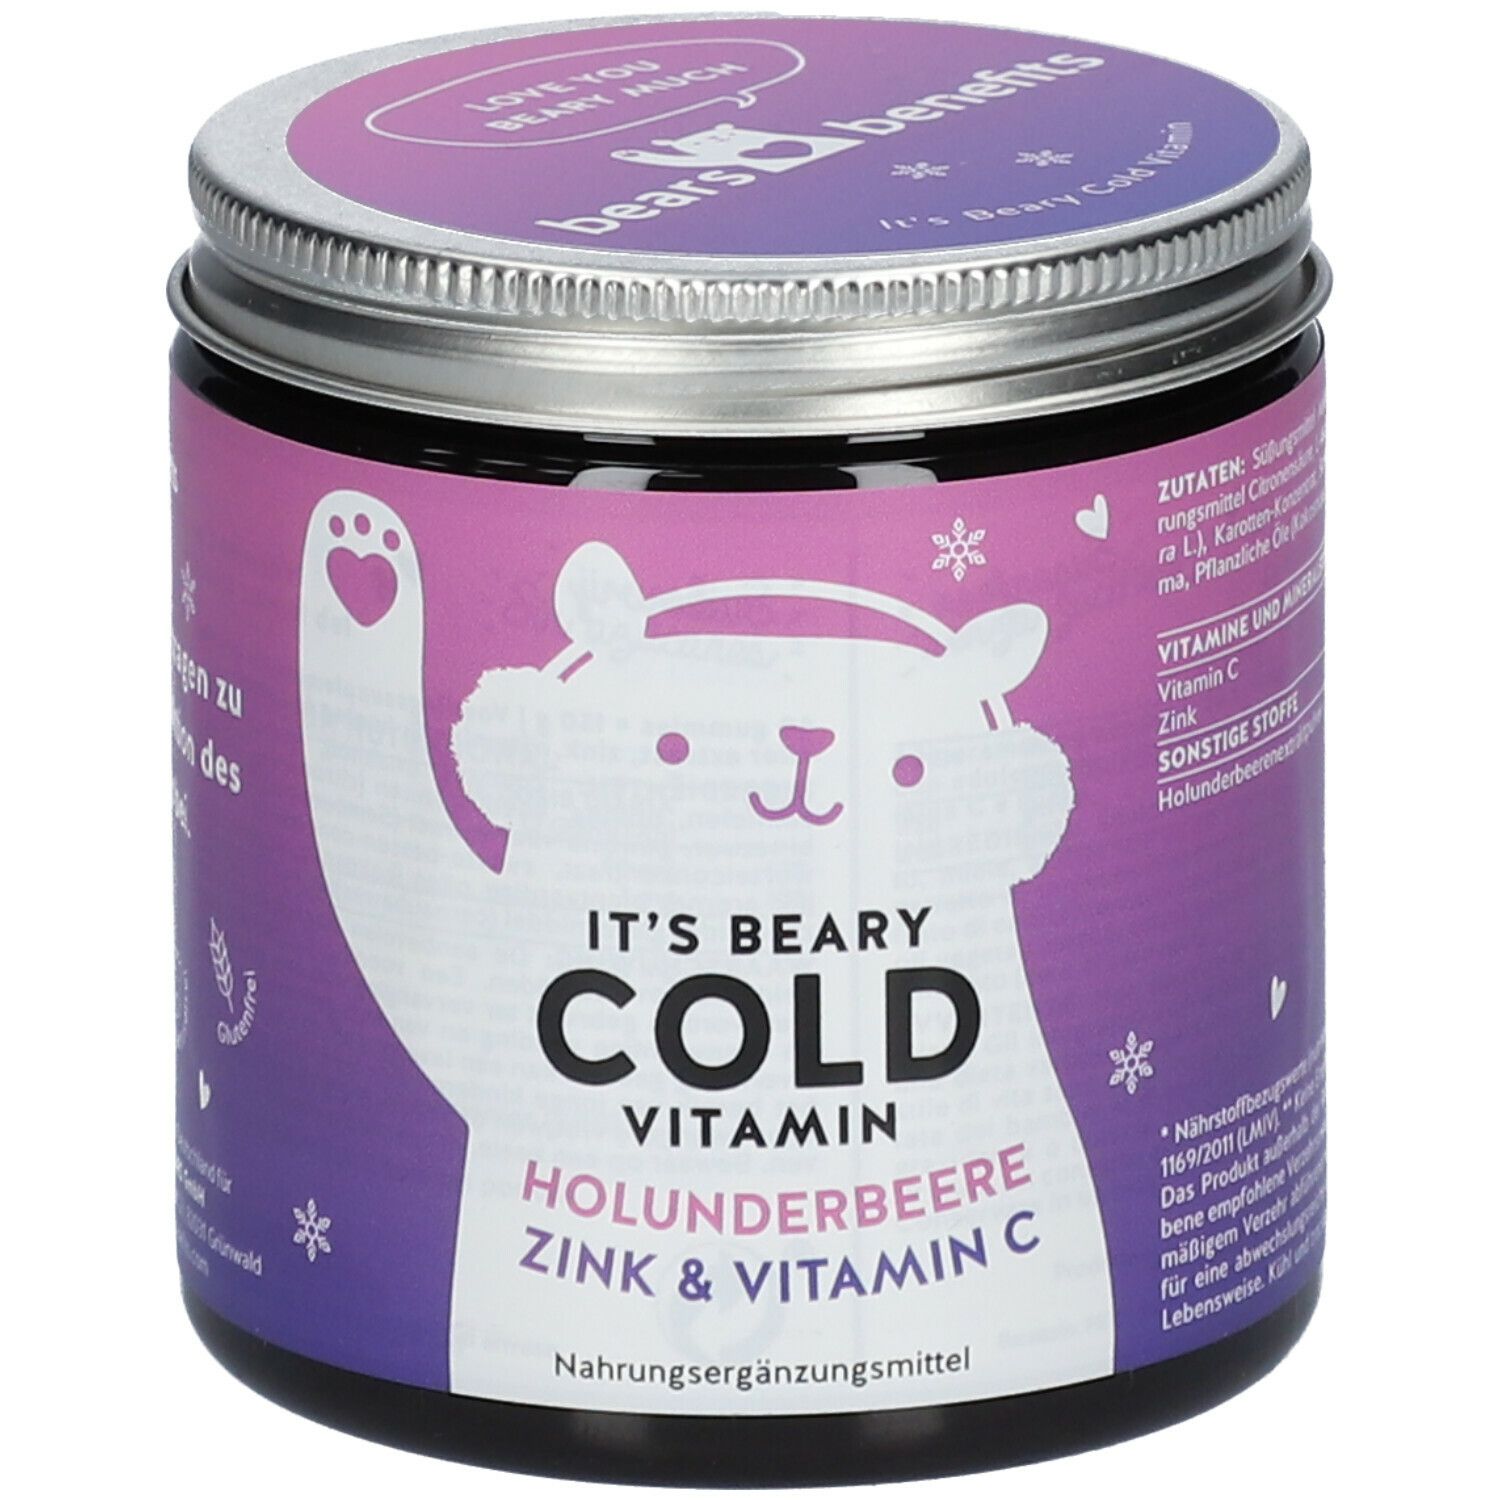 IT'S BEARY COLD VITAMIN